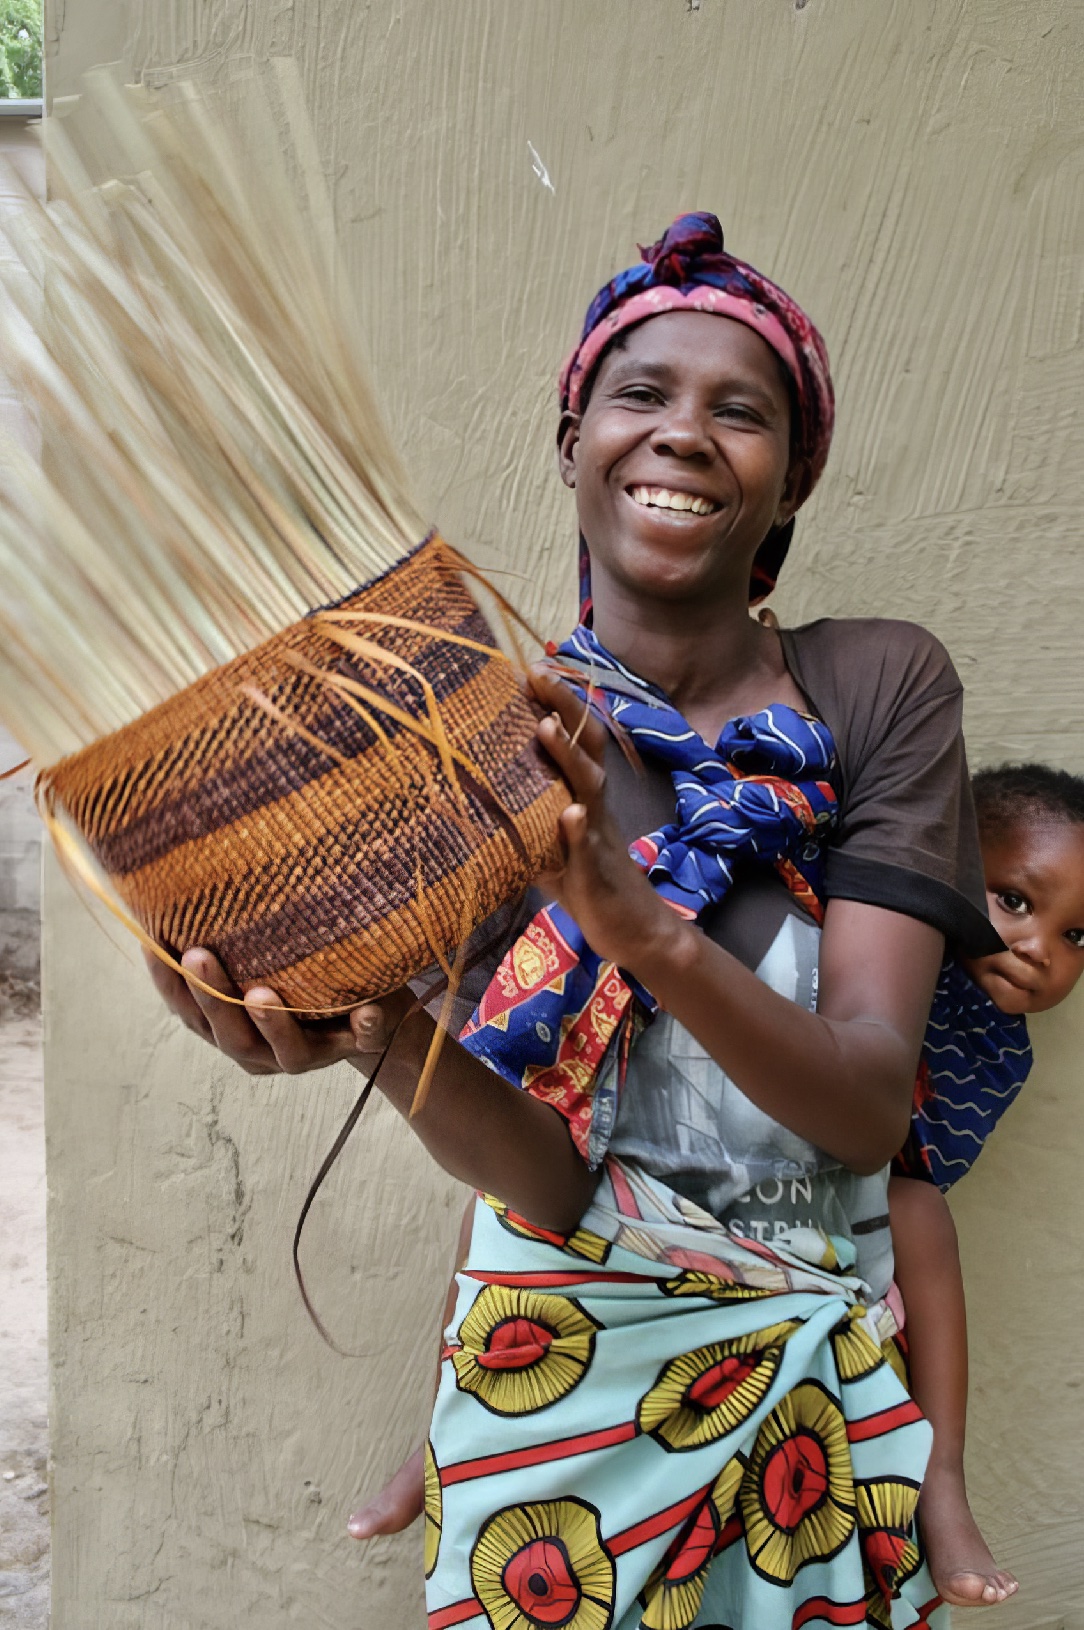 A San woman holding her partly woven basket, while a small child peers around her shoulder.